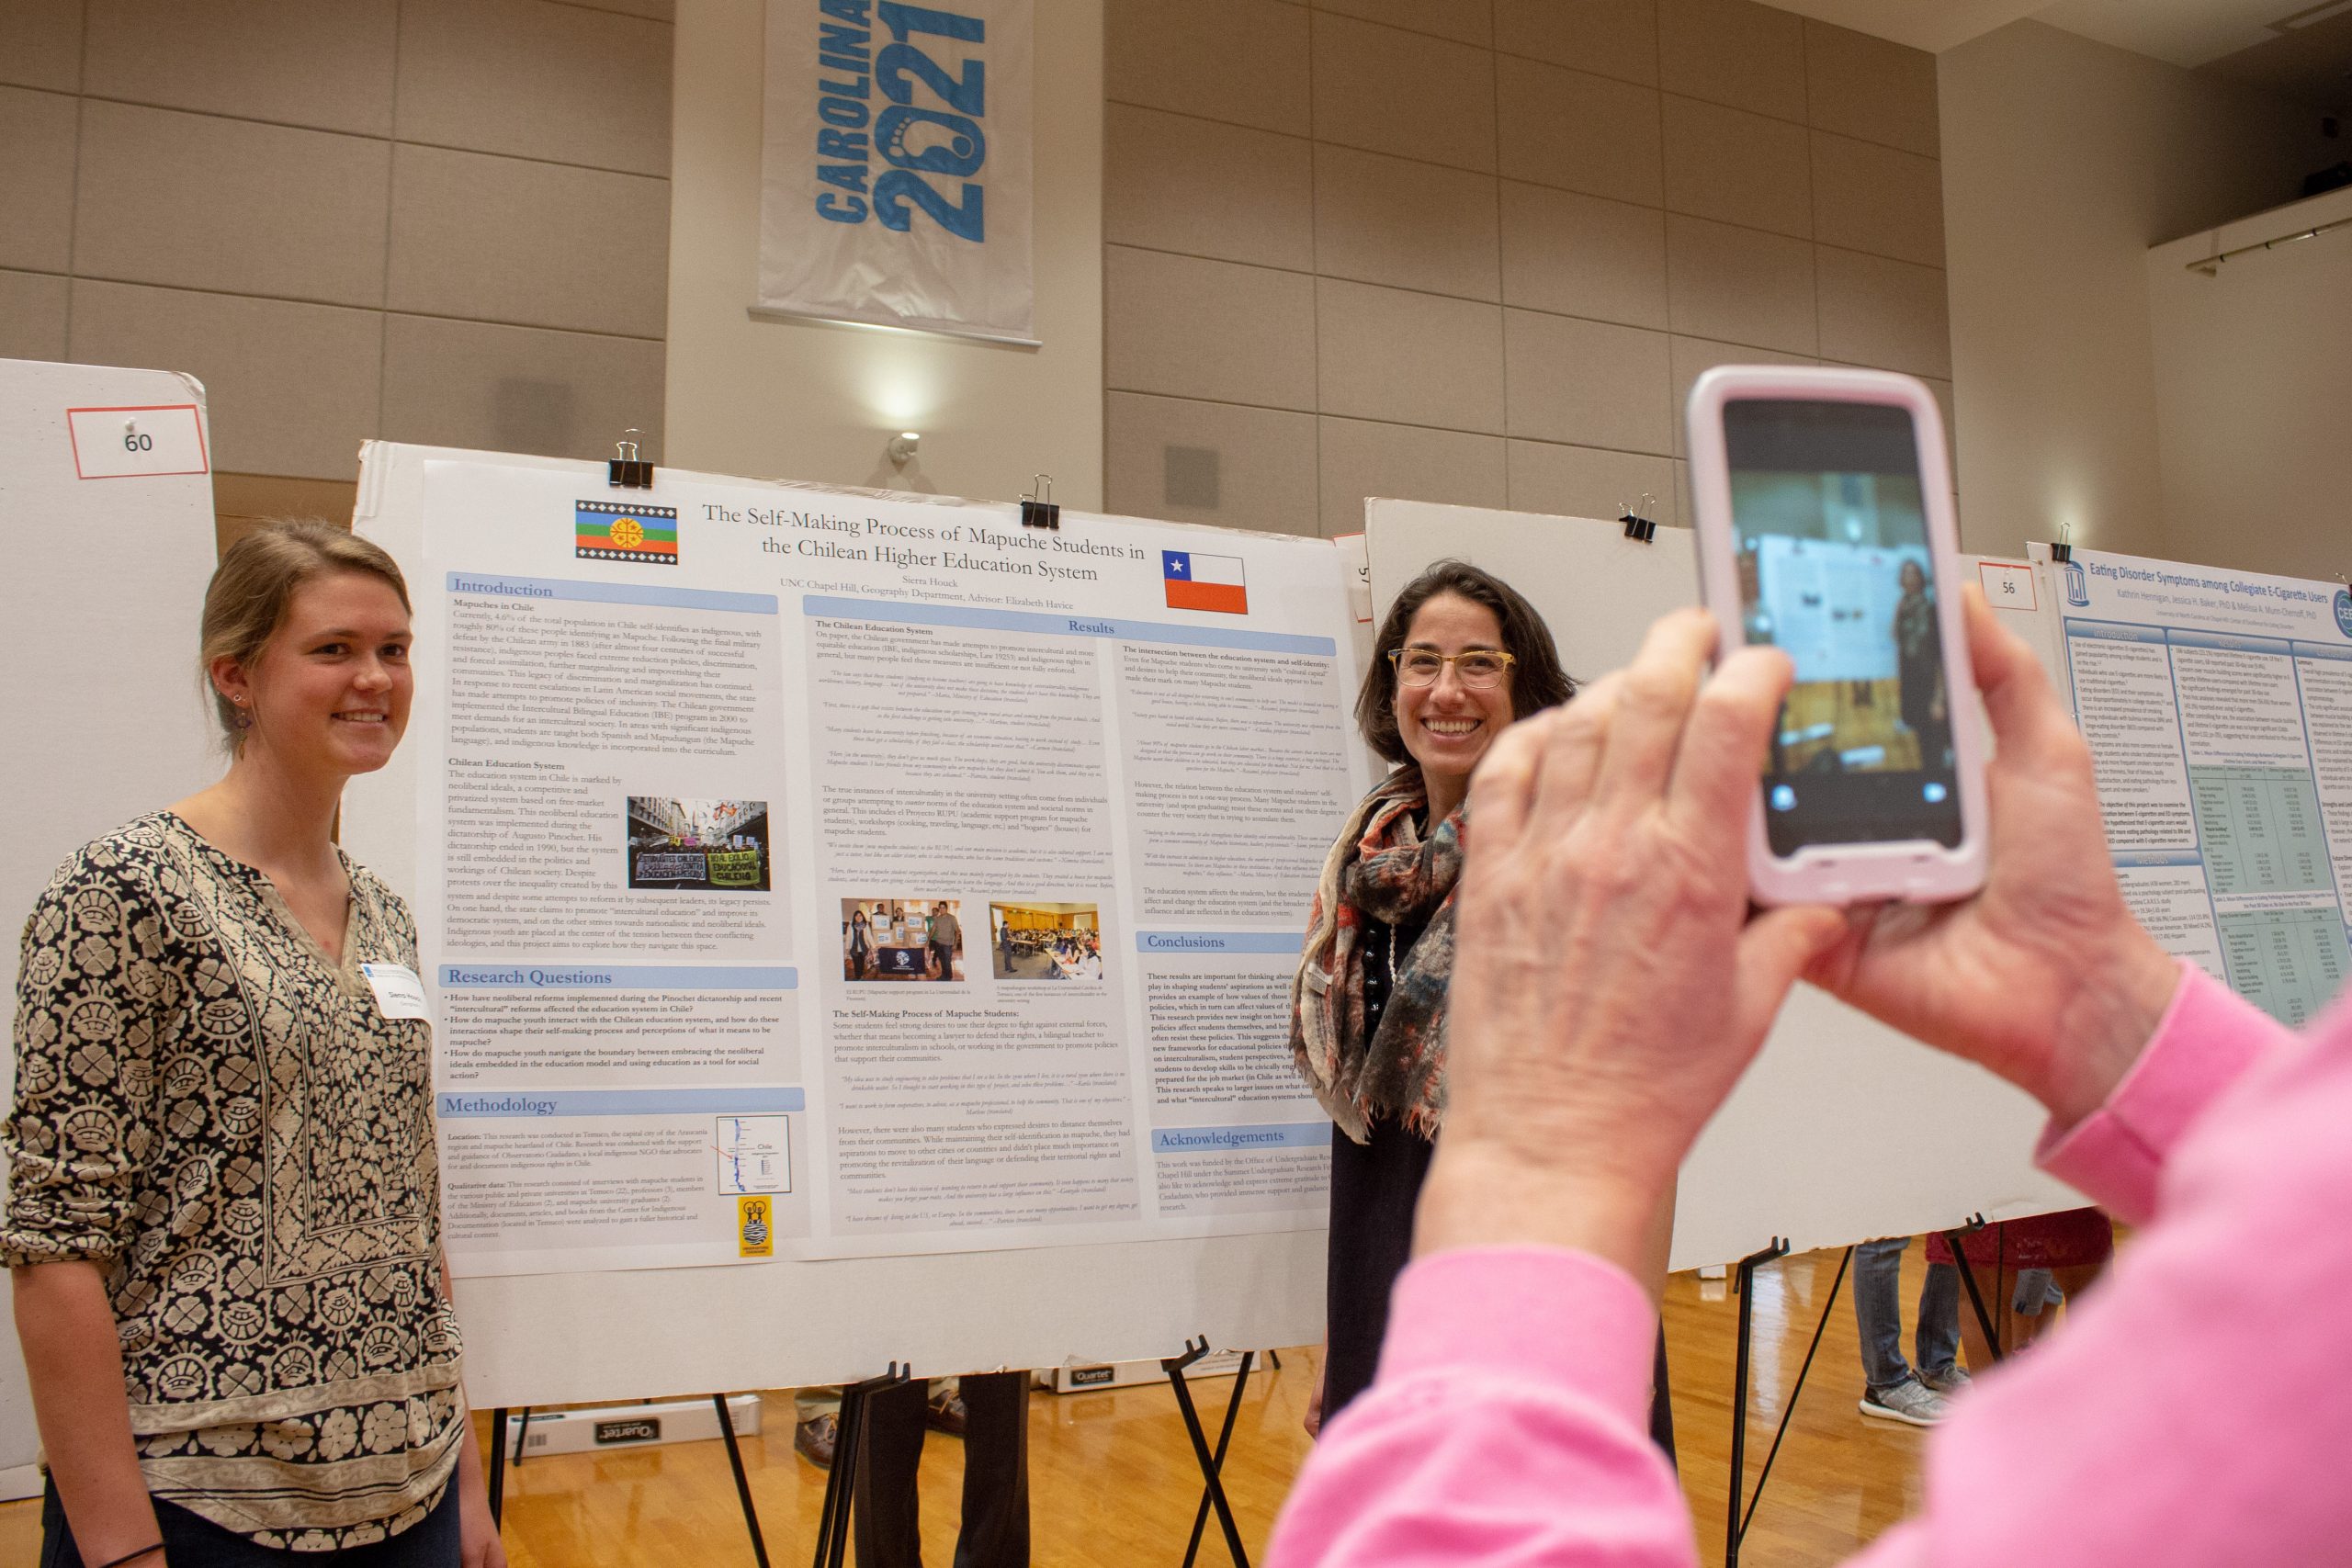 Sierra Houck and her advisor Elizabeth Havice pose for a photo taken by Houck's parents. Behind them is Houck's research poster, "The Self-Making Process of  Mapuche Students in the Chilean Higher Education System"